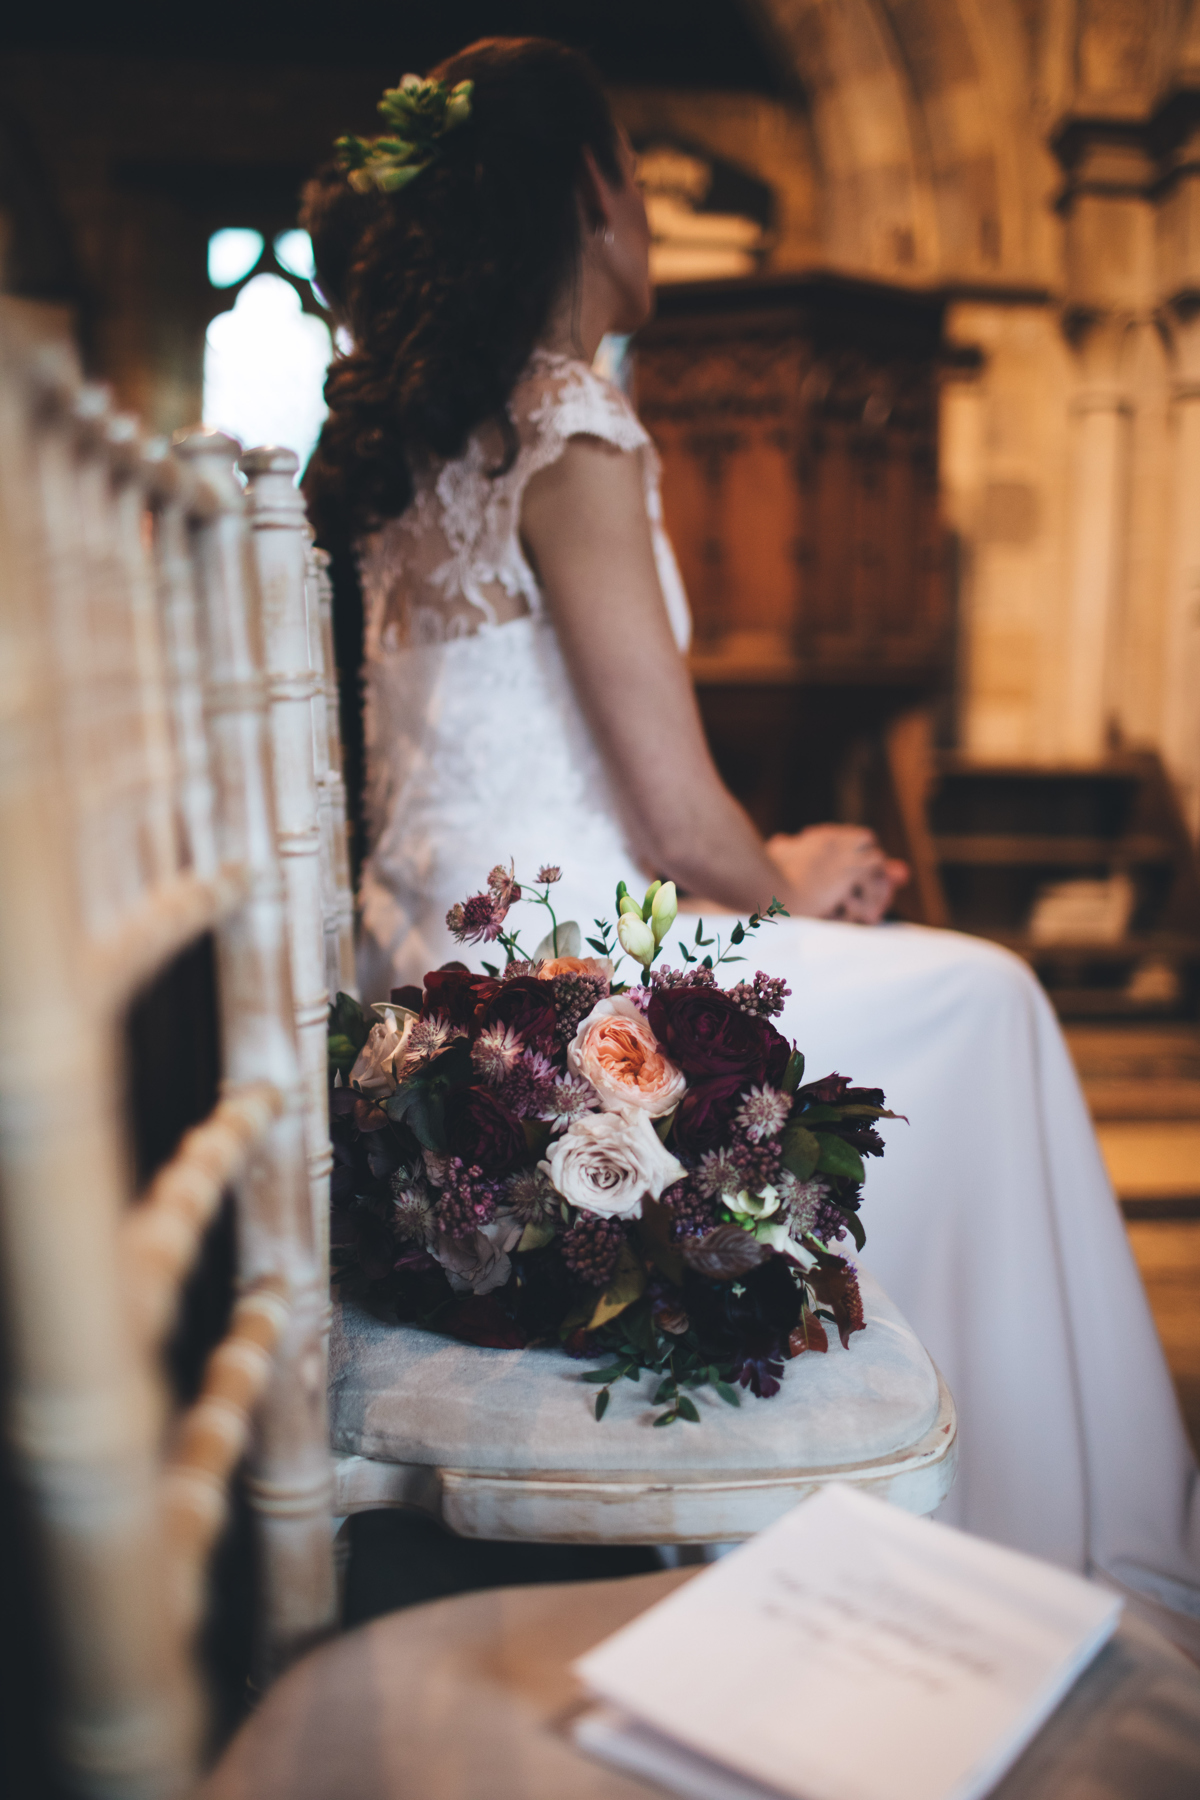 Side view of bride sitting on a chair at the front of the church with her bouquet sat on a chair next to her